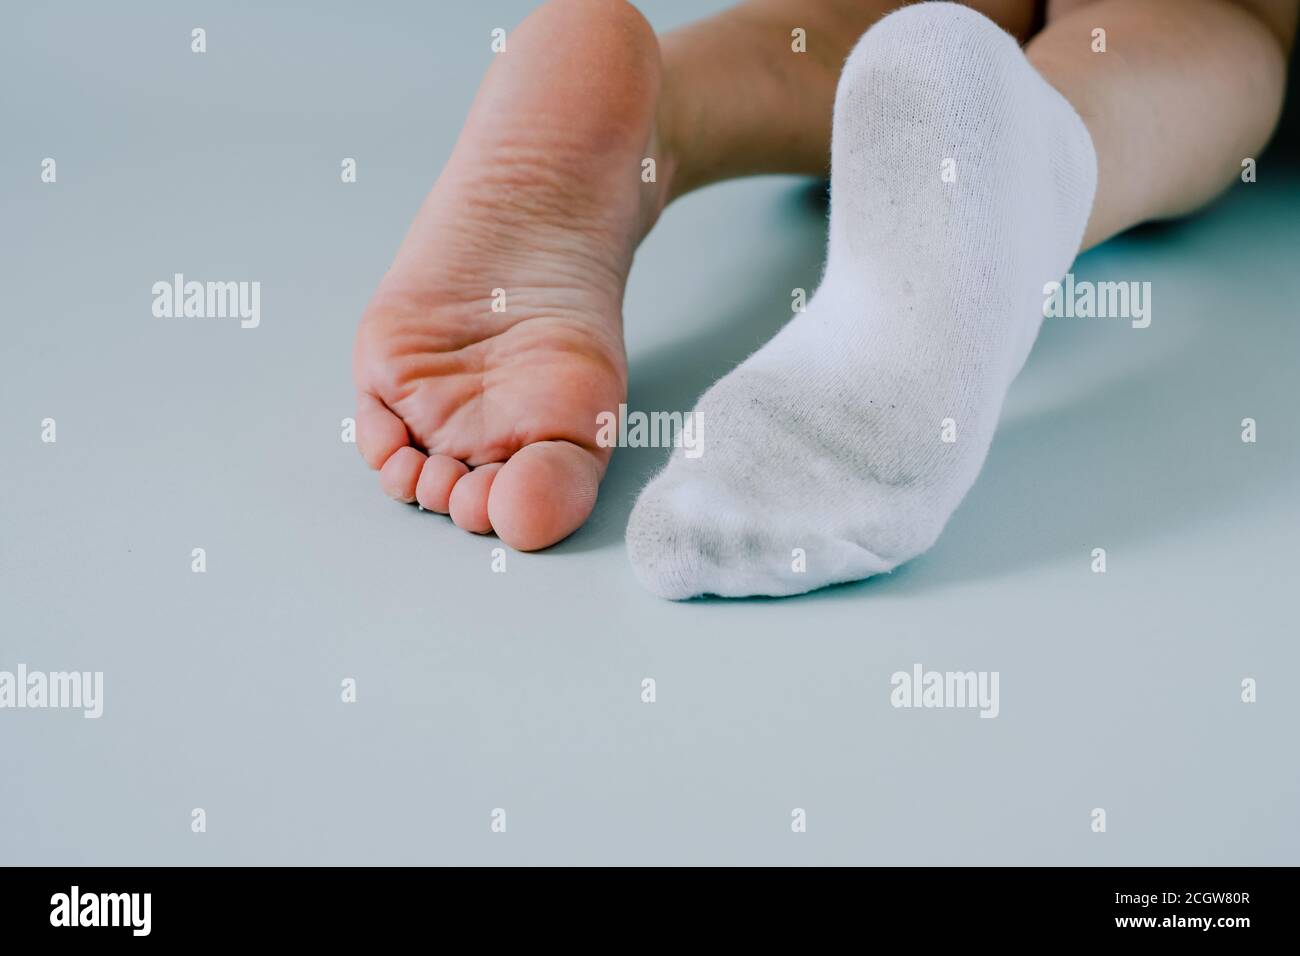 right foot in dirty sock, left foot without socks.Isolated on gray background Stock Photo